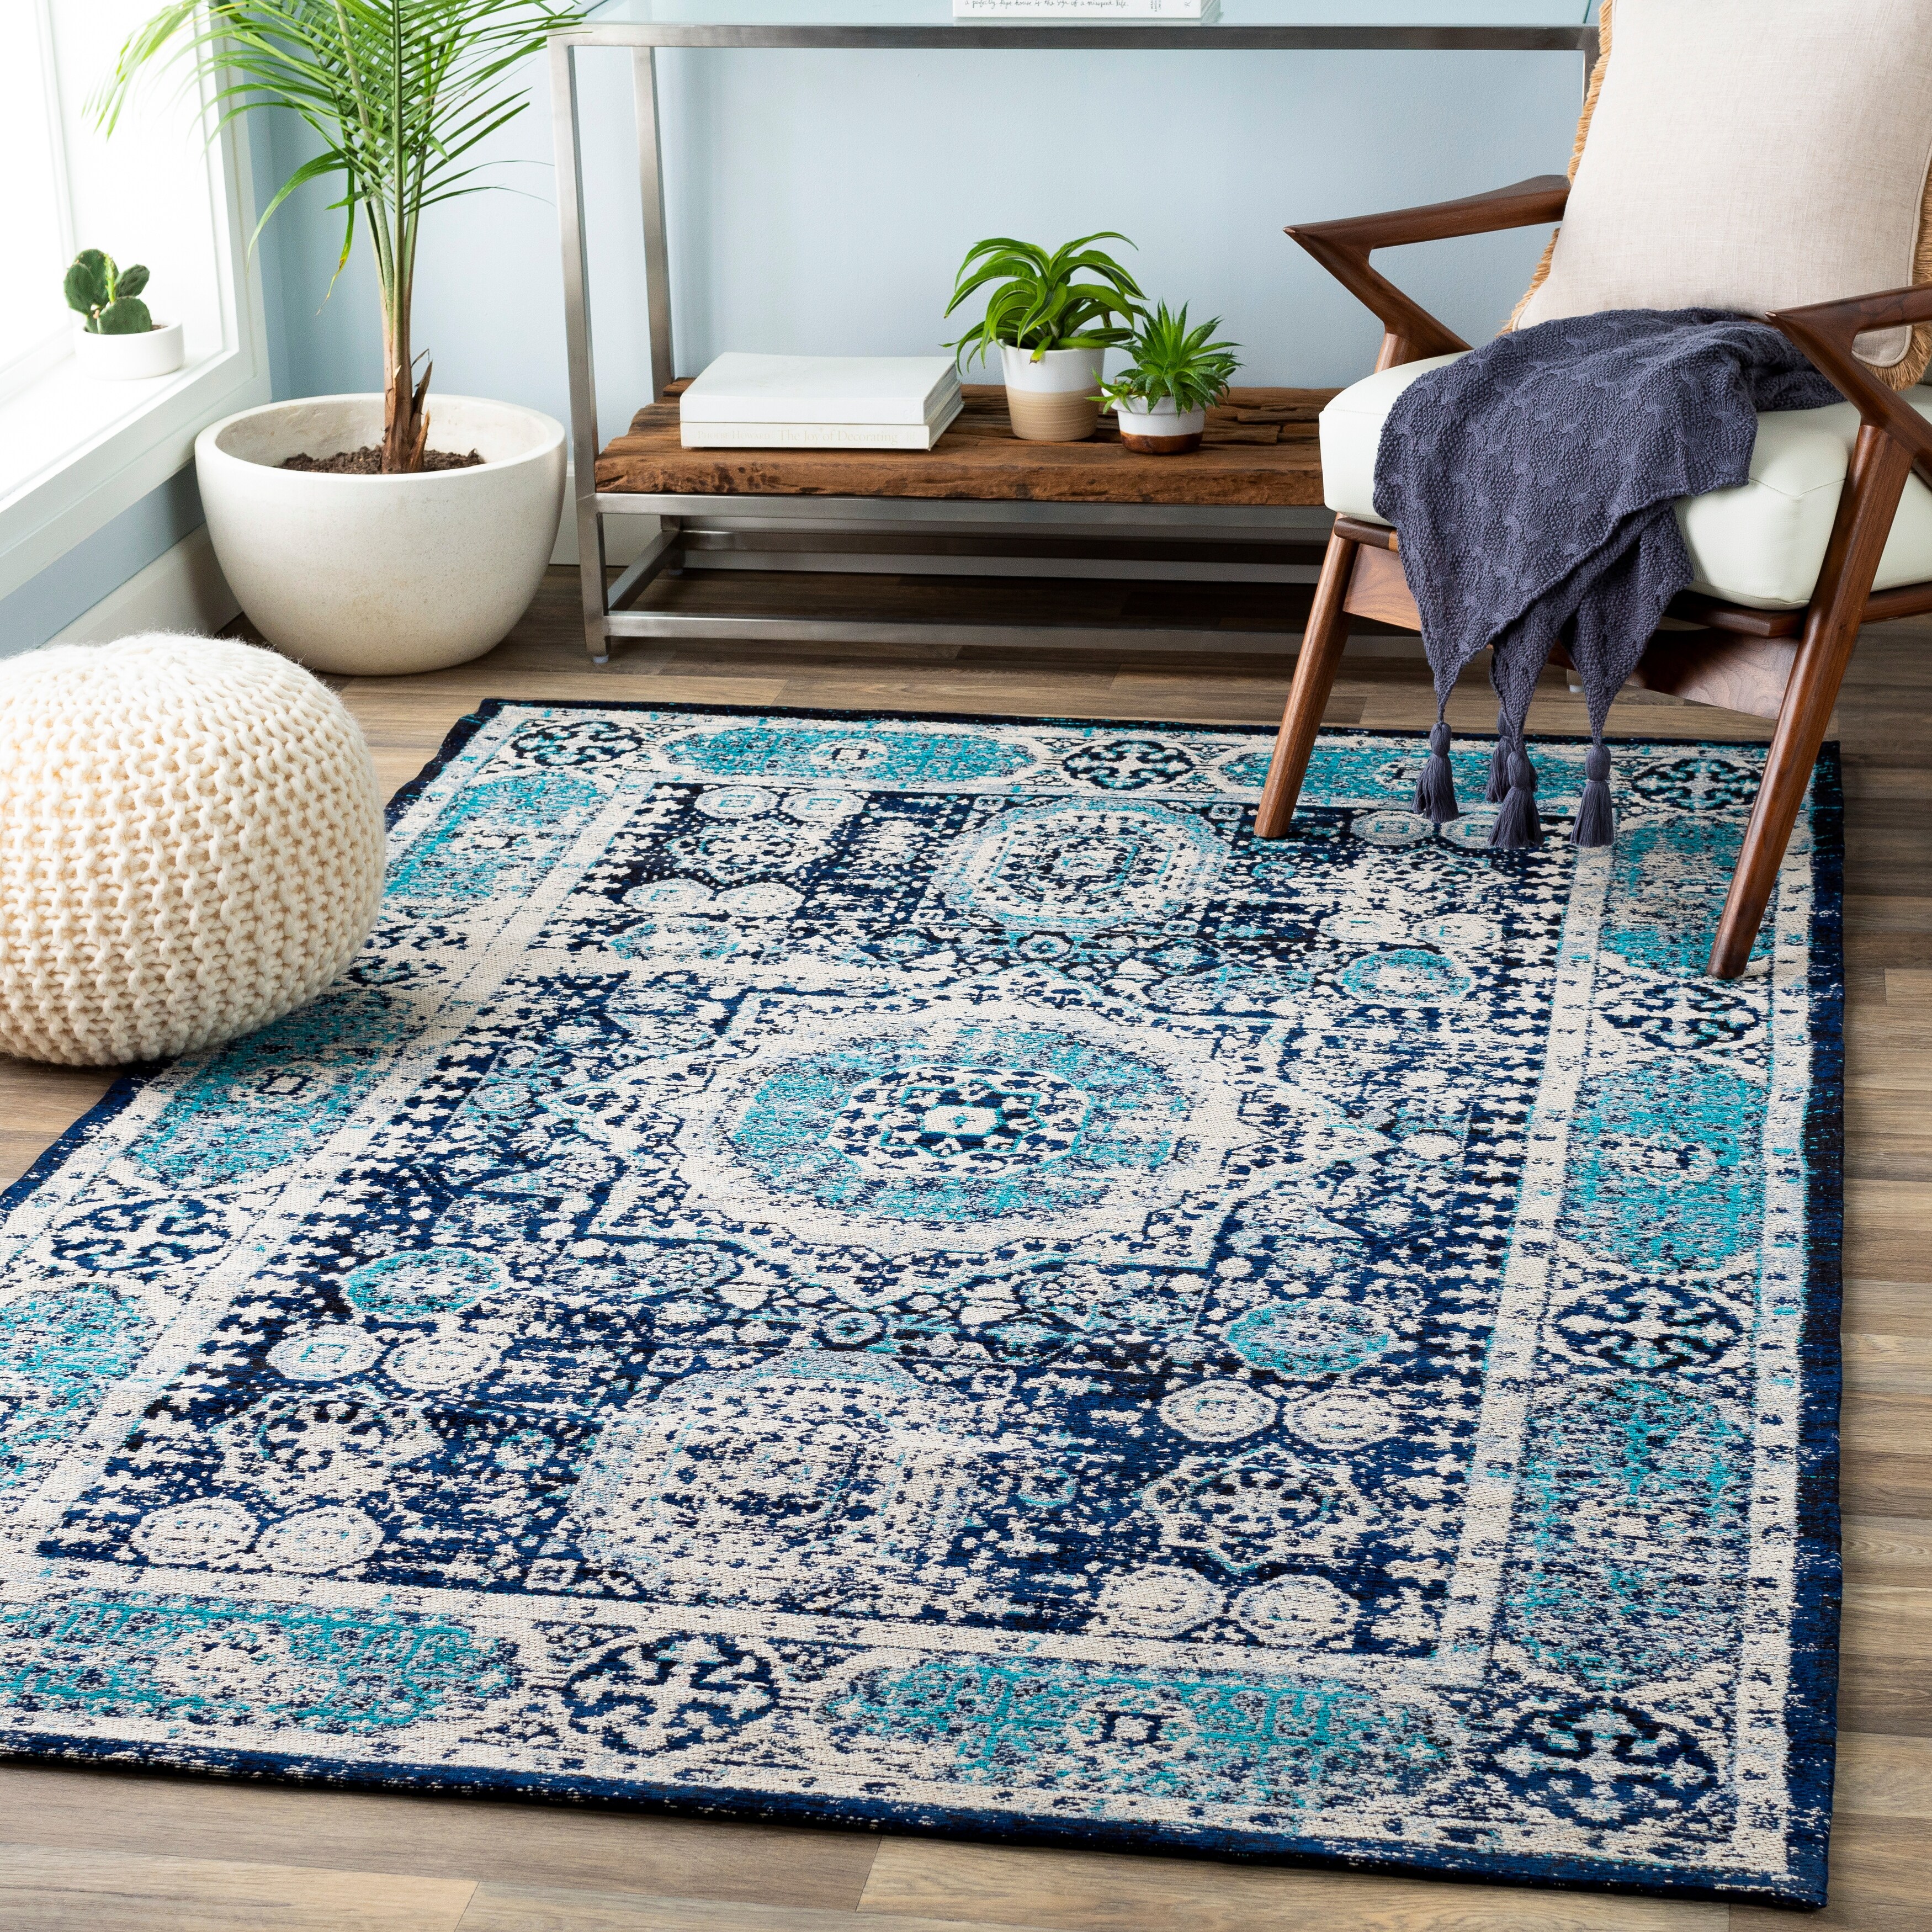 https://ak1.ostkcdn.com/images/products/is/images/direct/92ae92a0b47ab5c0d51ae21b4cd4a6815455eed6/The-Curated-Nomad-Sweeny-Hand-woven-Area-Rug.jpg